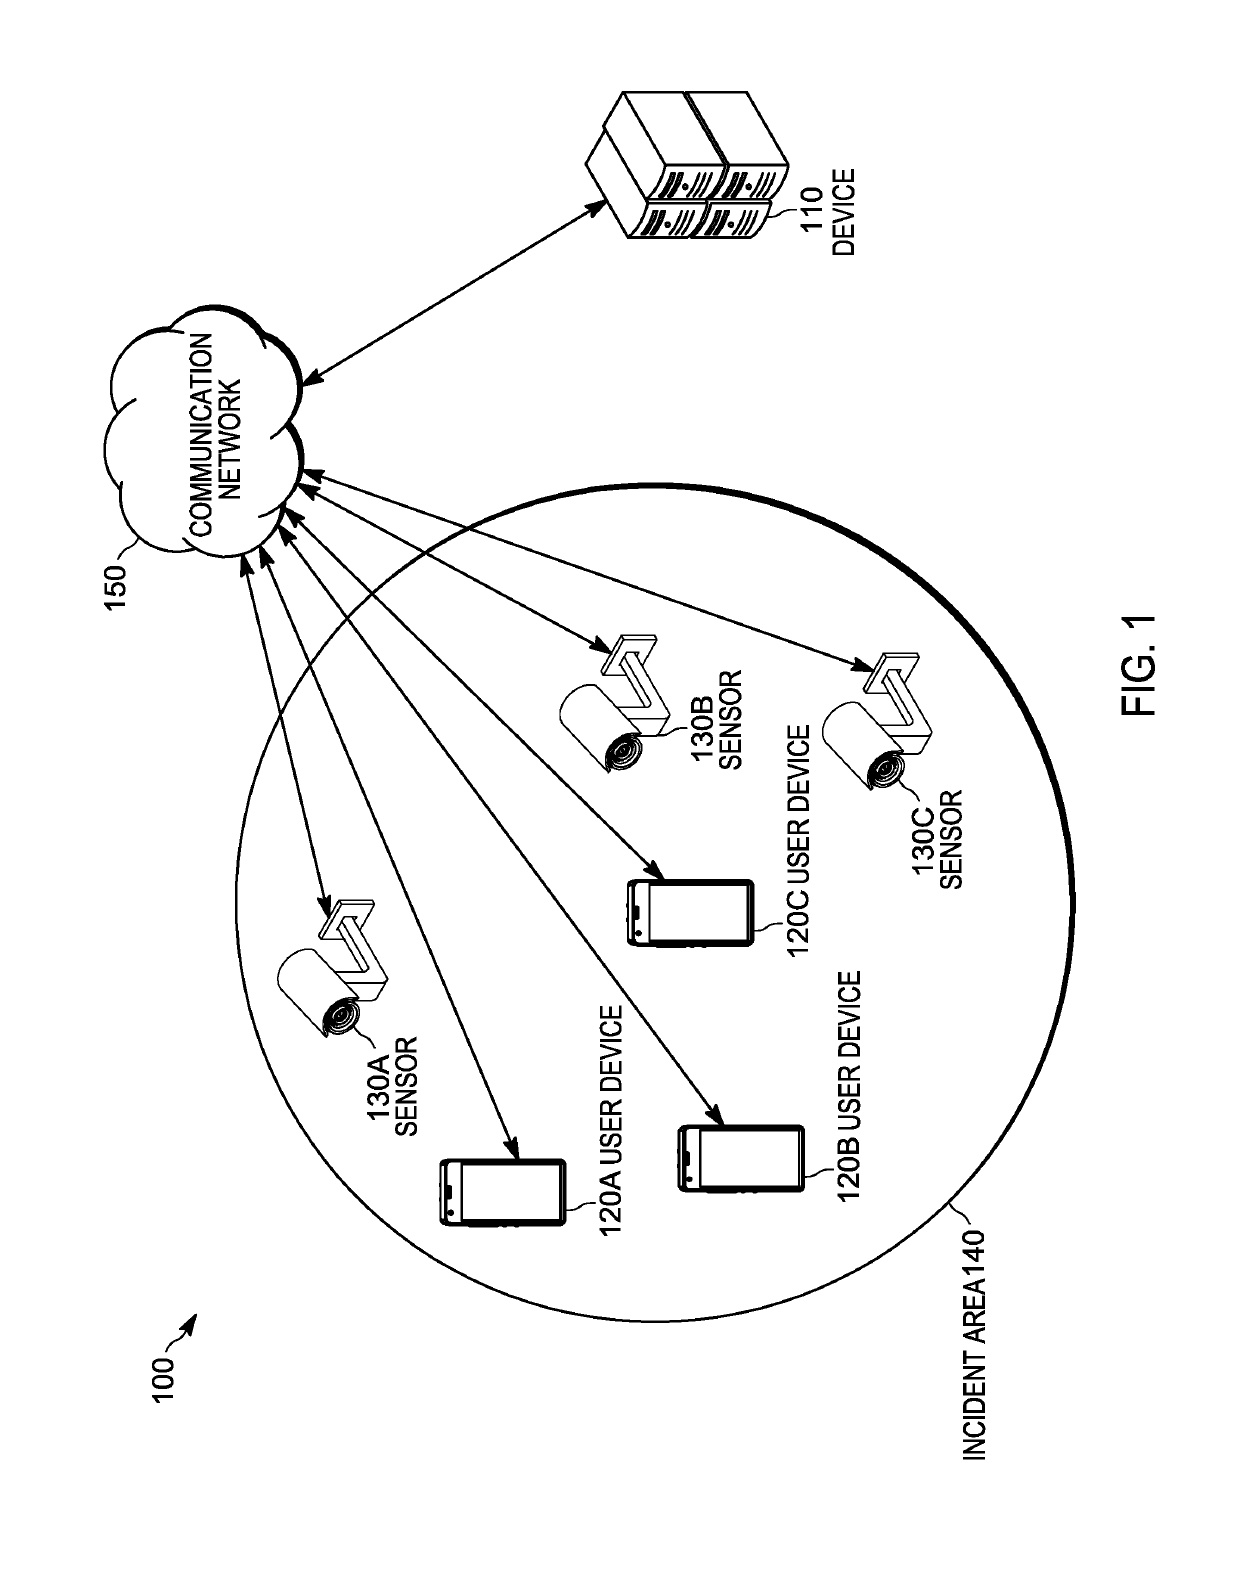 Method and device for providing safe zone information for incident area